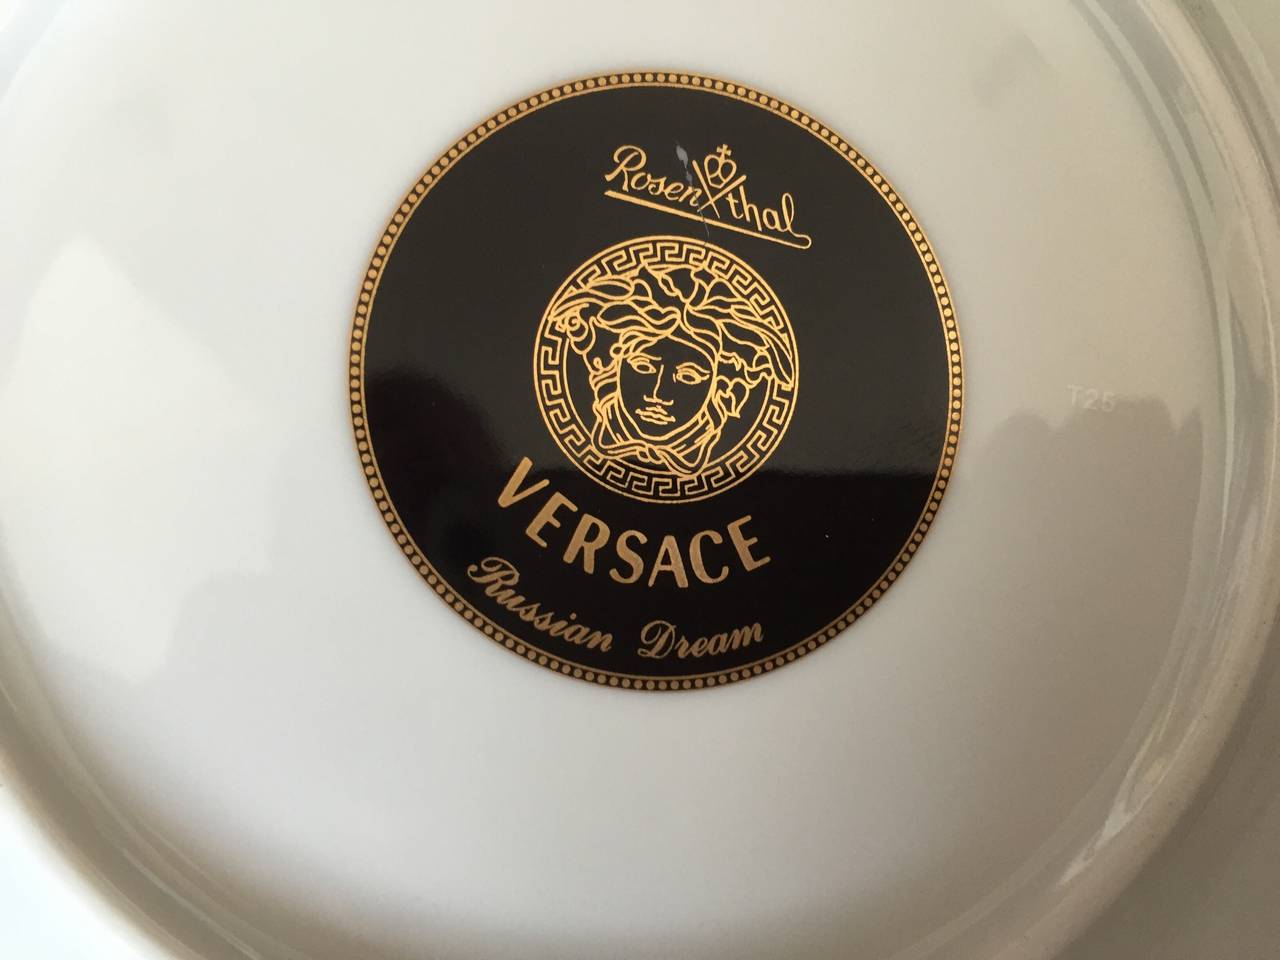 Women's or Men's Brand New Vintage Gianni Versace China Salad / Appetizer Plates ( Set of 6 )